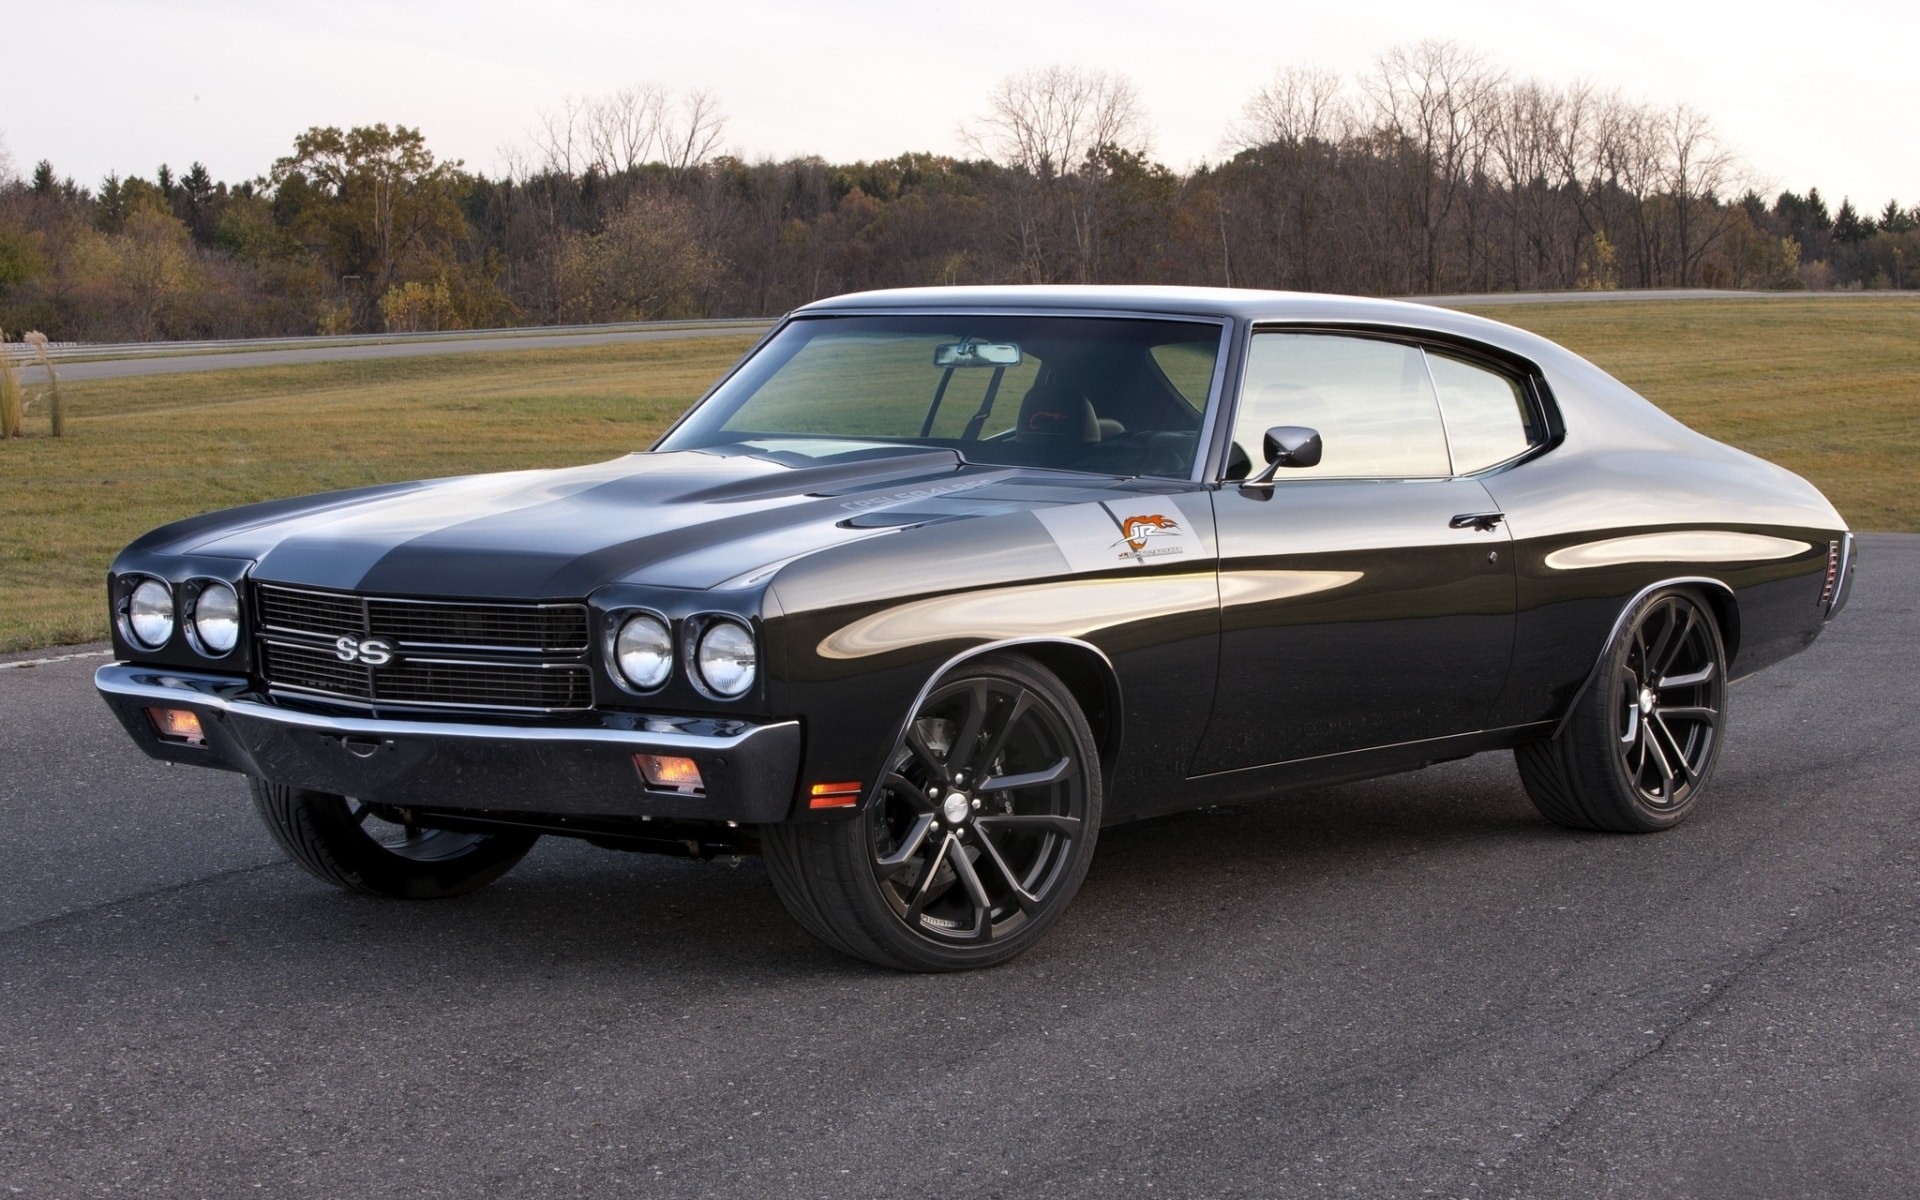 1920x1200 1970 Chevrolet Chevelle SS Wallpapers 1970 Chevrolet Chevelle SS widescreen  wallpapers